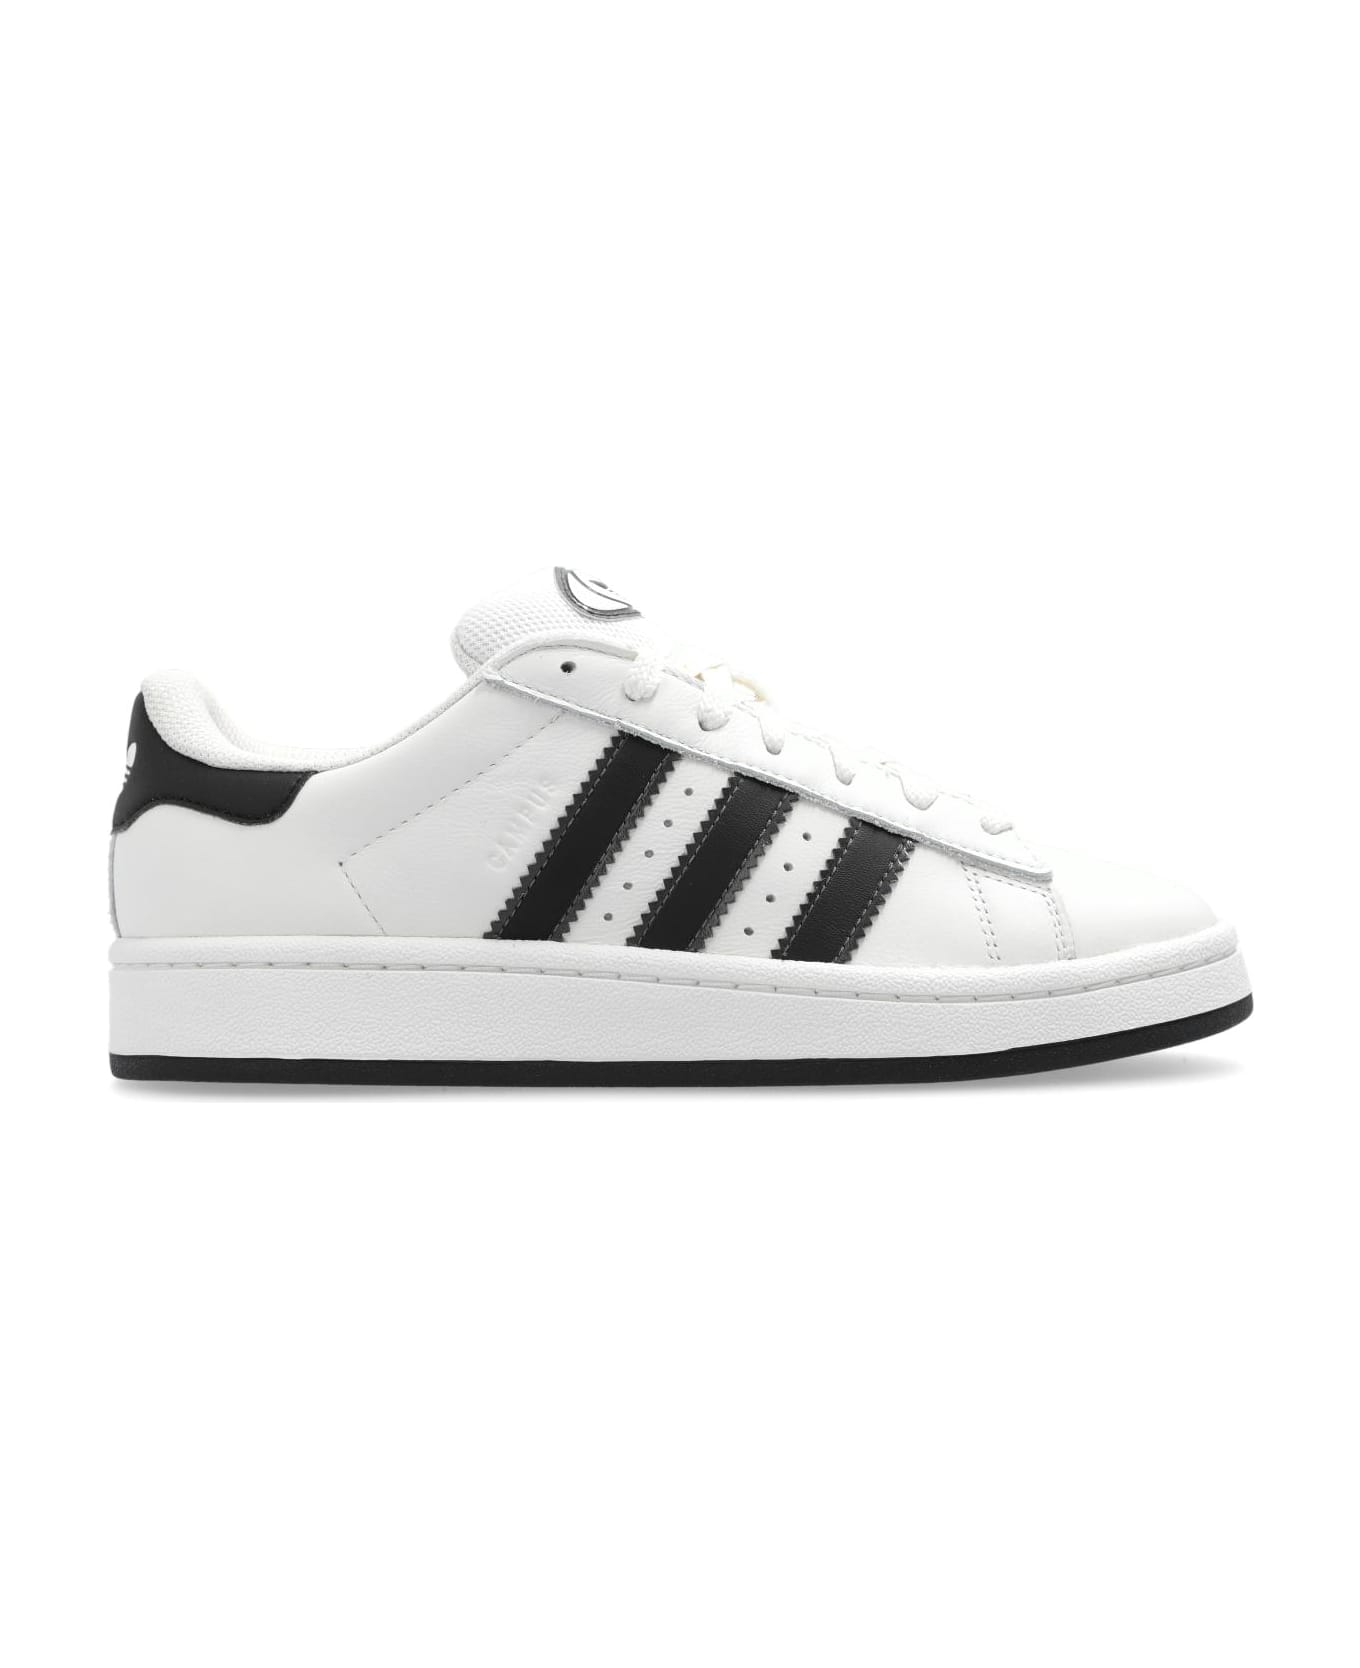 Adidas 'campus 00s' Sneakers - White and black スニーカー